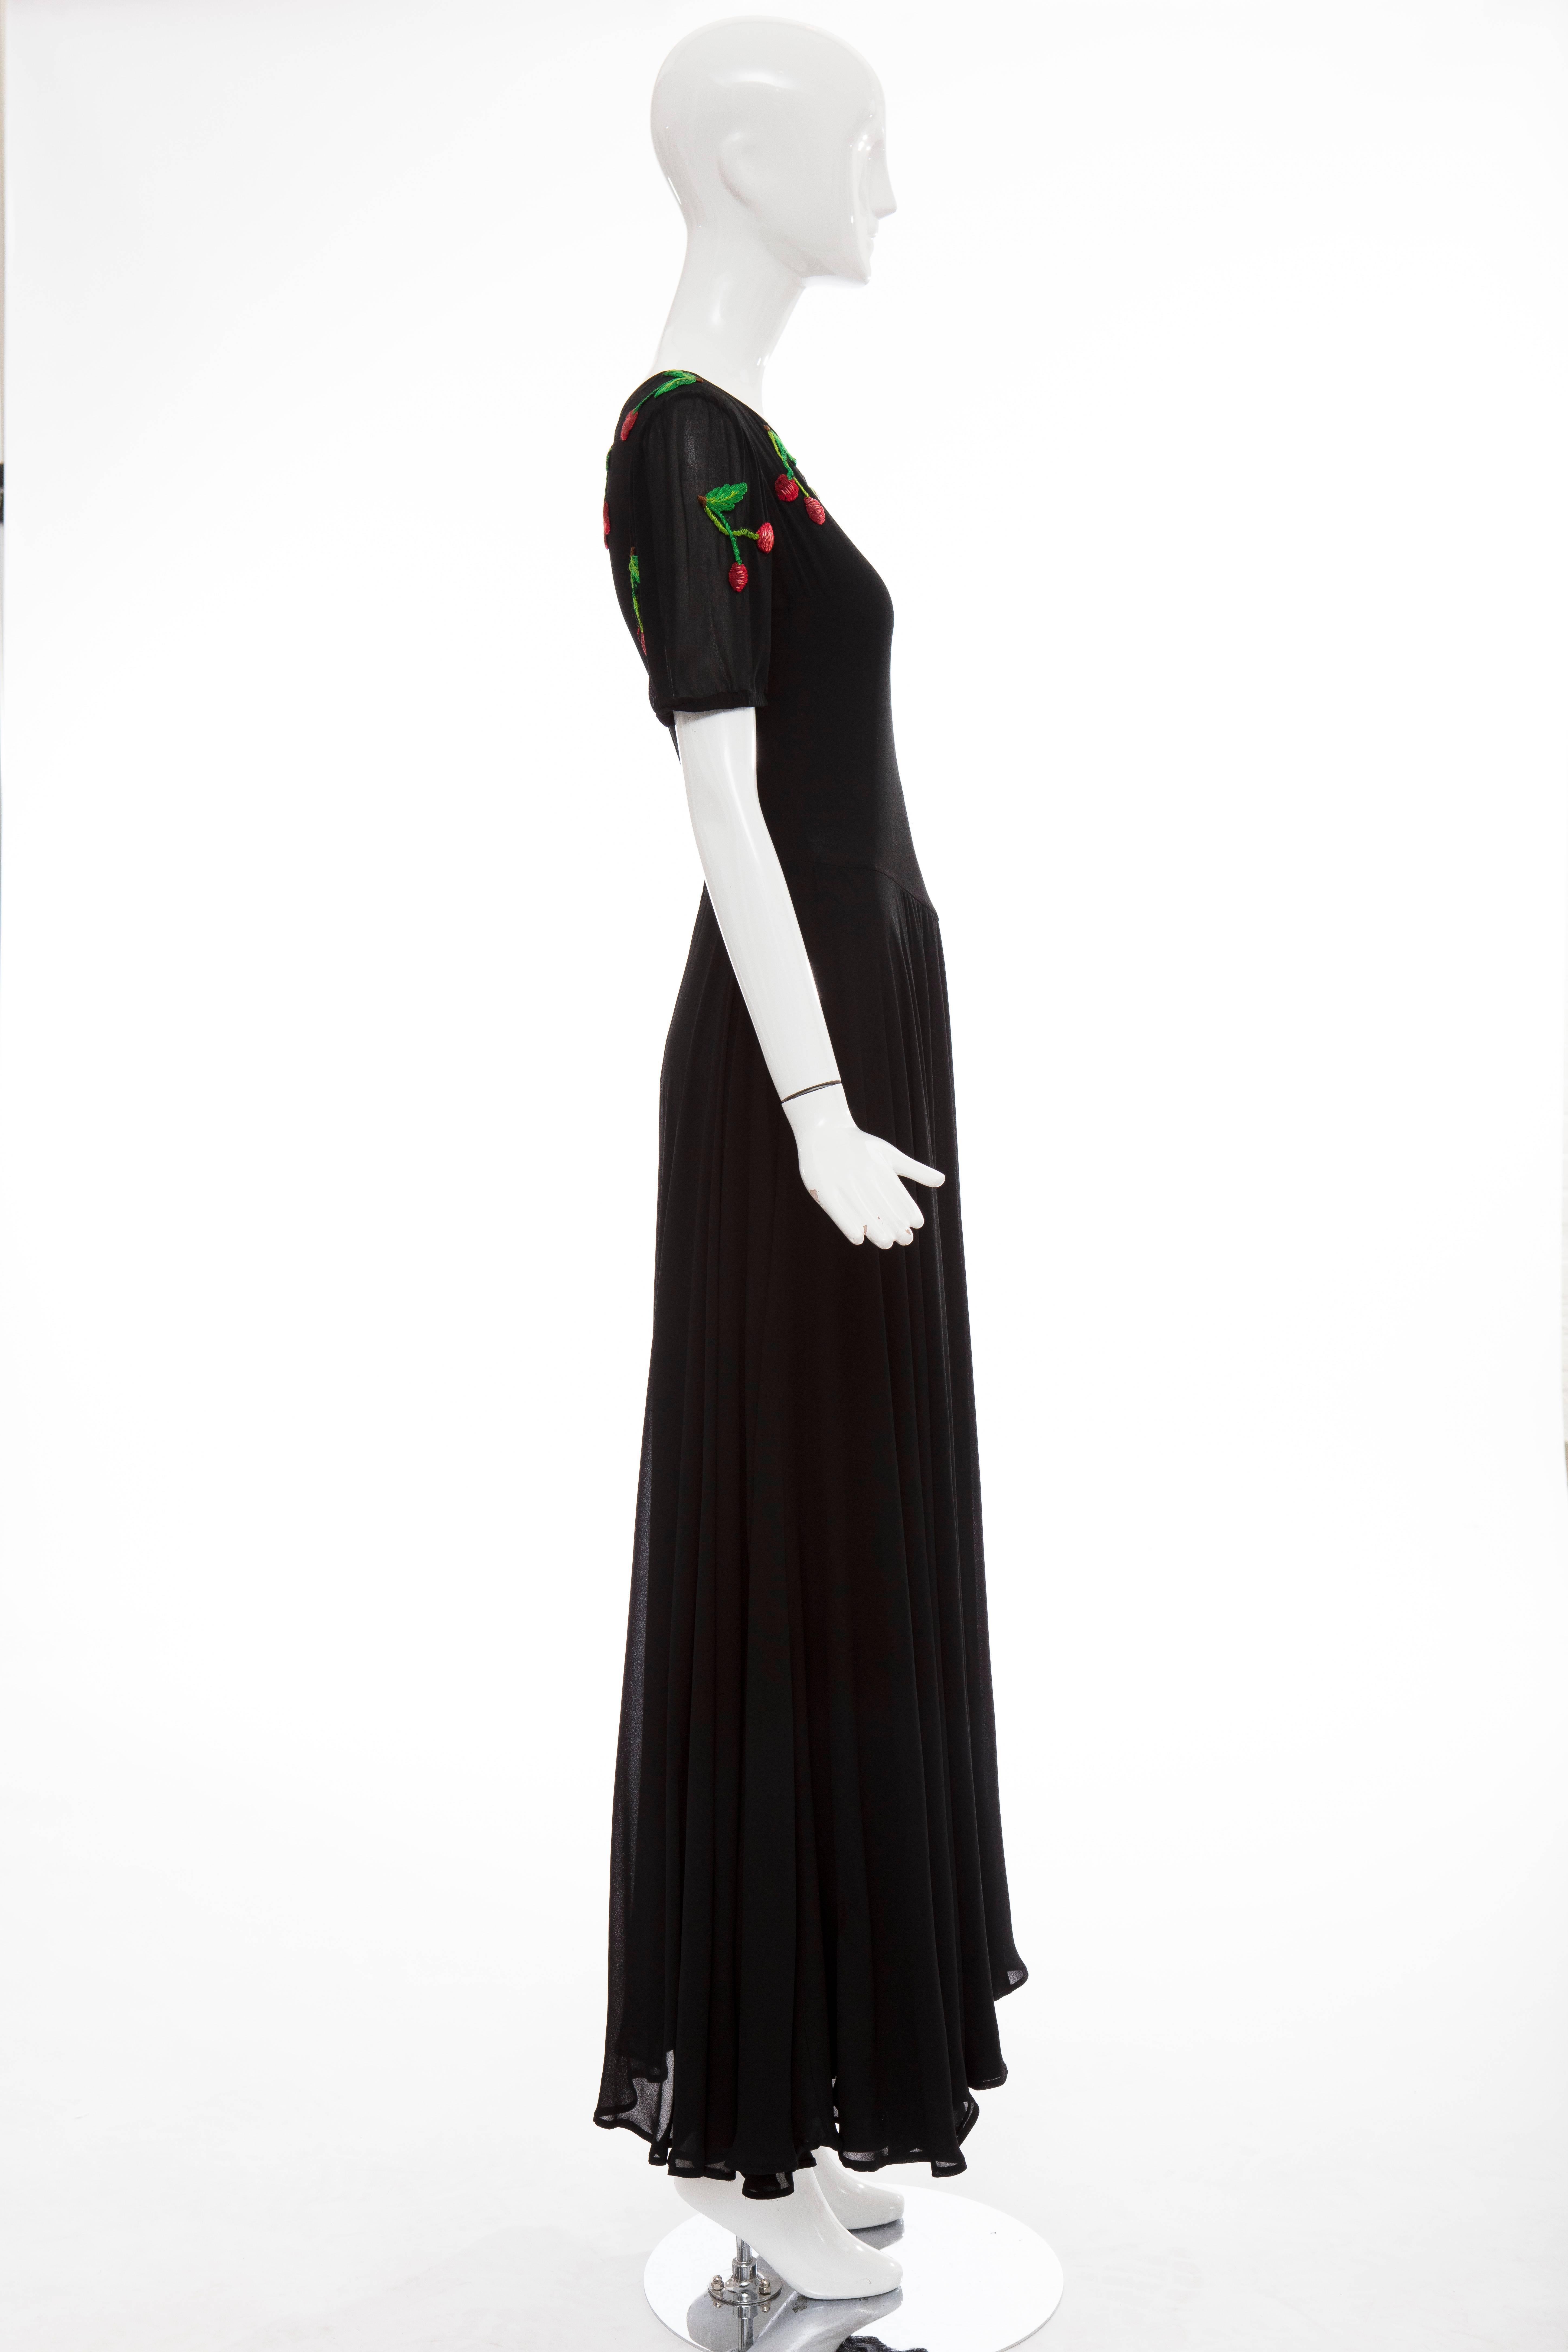 Valentino Black Crepe Evening Dress With Hand Embroidered Cherries, Circa 1970's 3